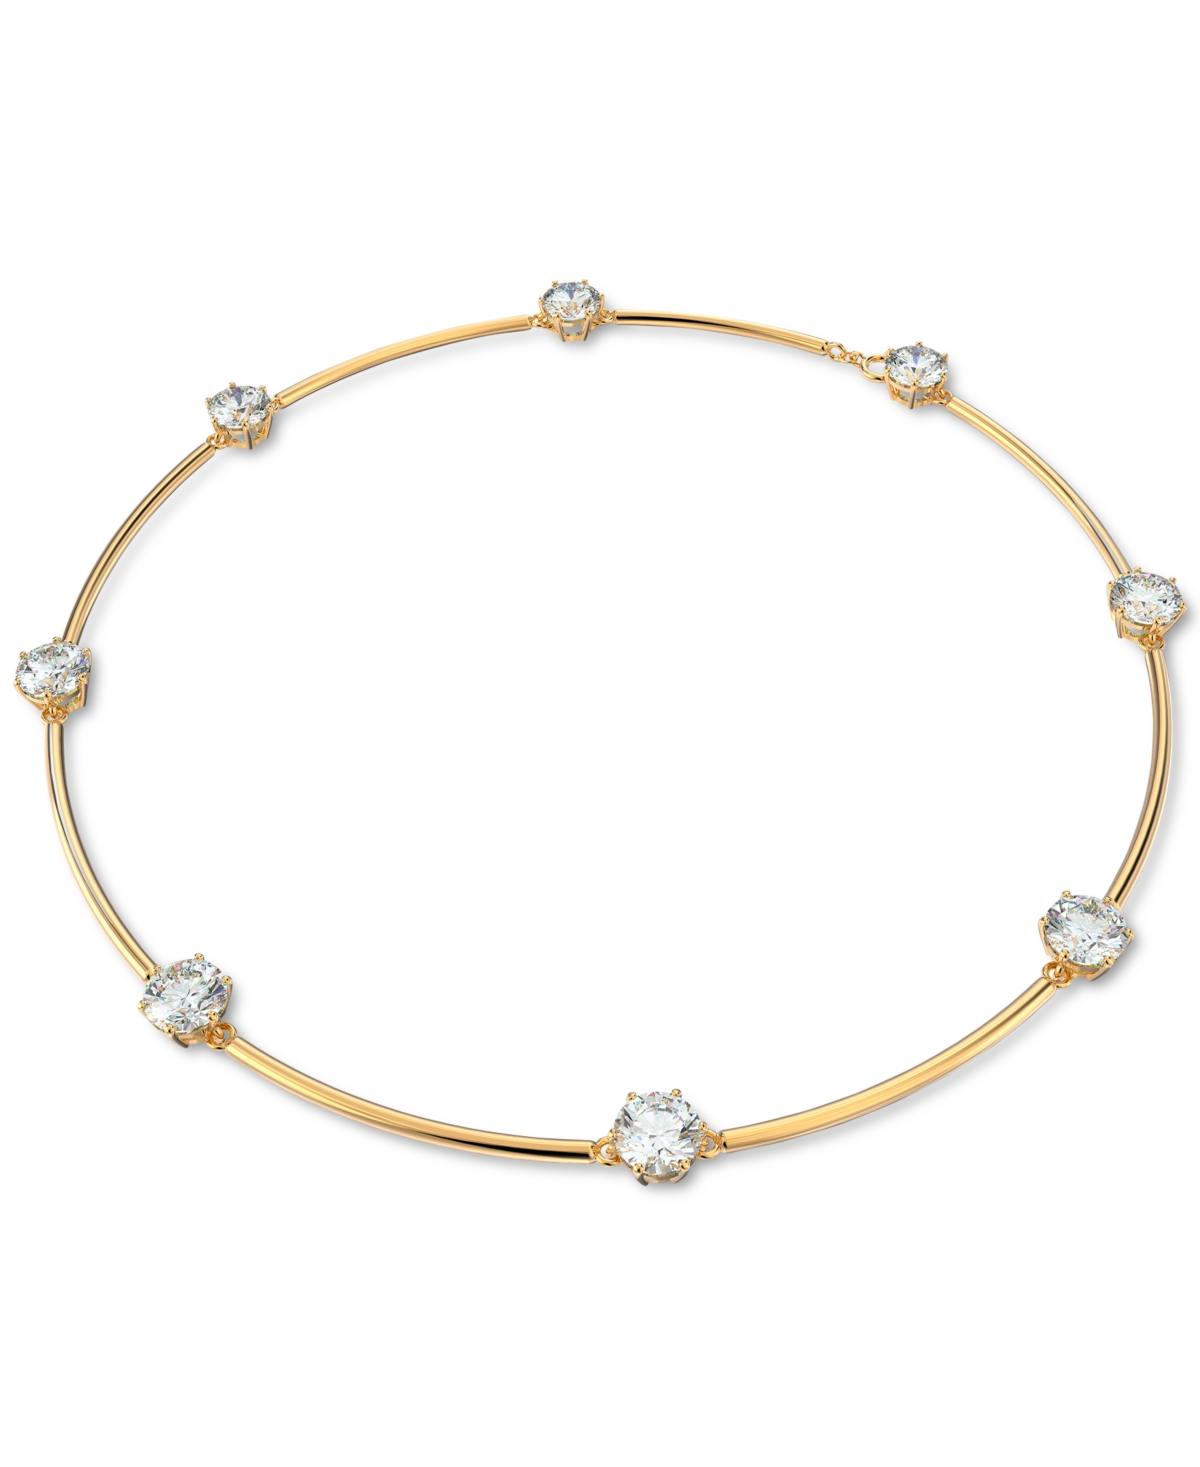 Gold-Tone Crystal Studded Choker Necklace, 14-1/8" + 2" extender - White